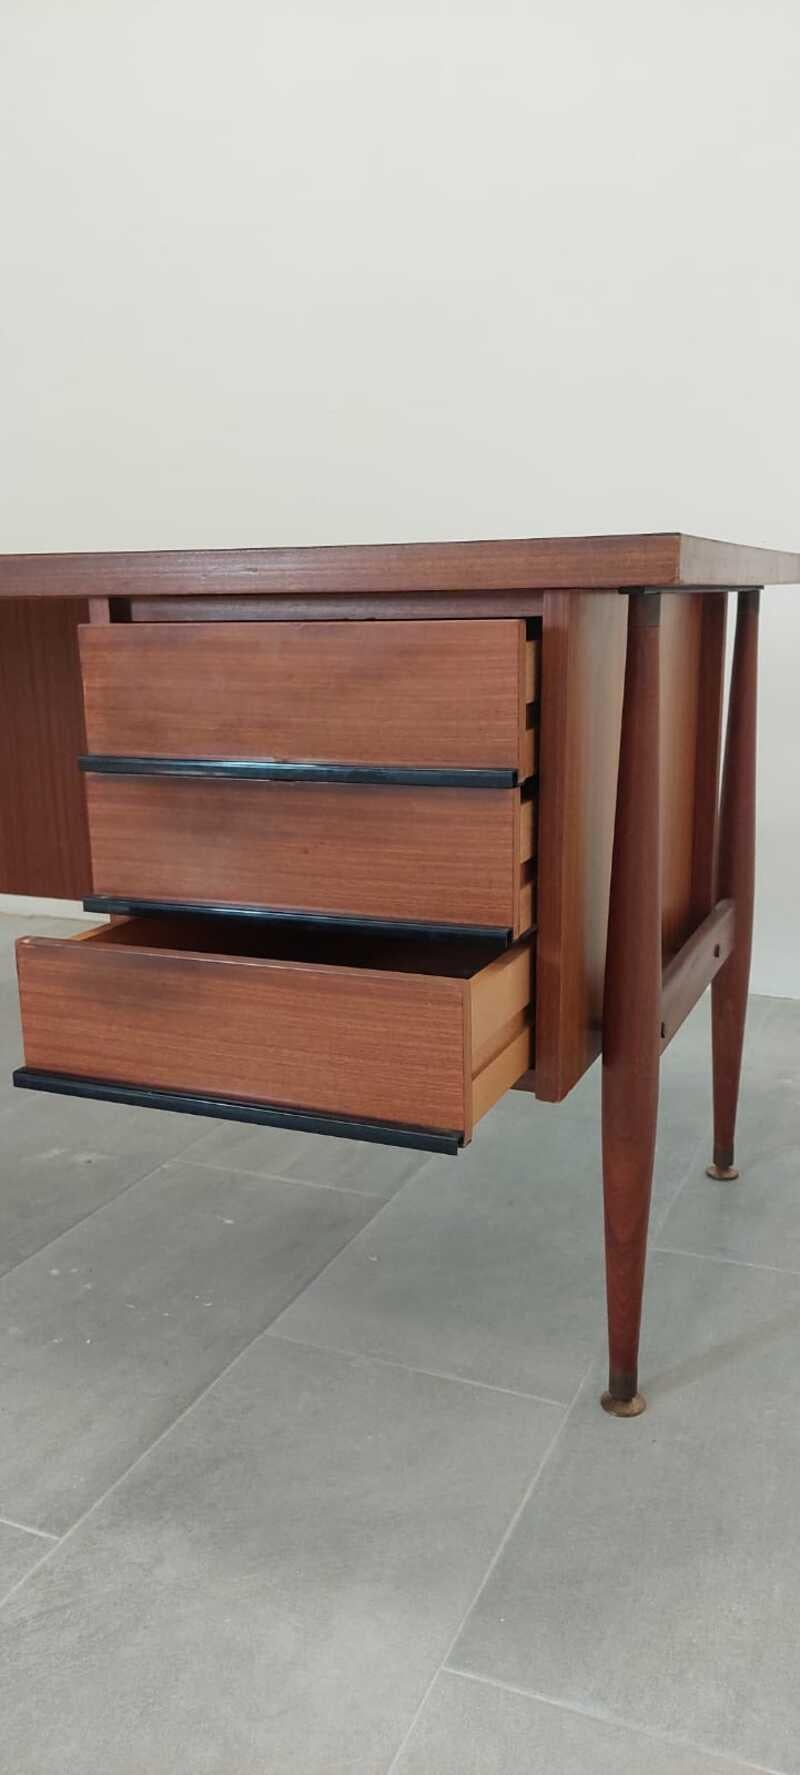 Other Renzo Schirolli Office Desk in Wood and Brass Italian Manufacture 1960s